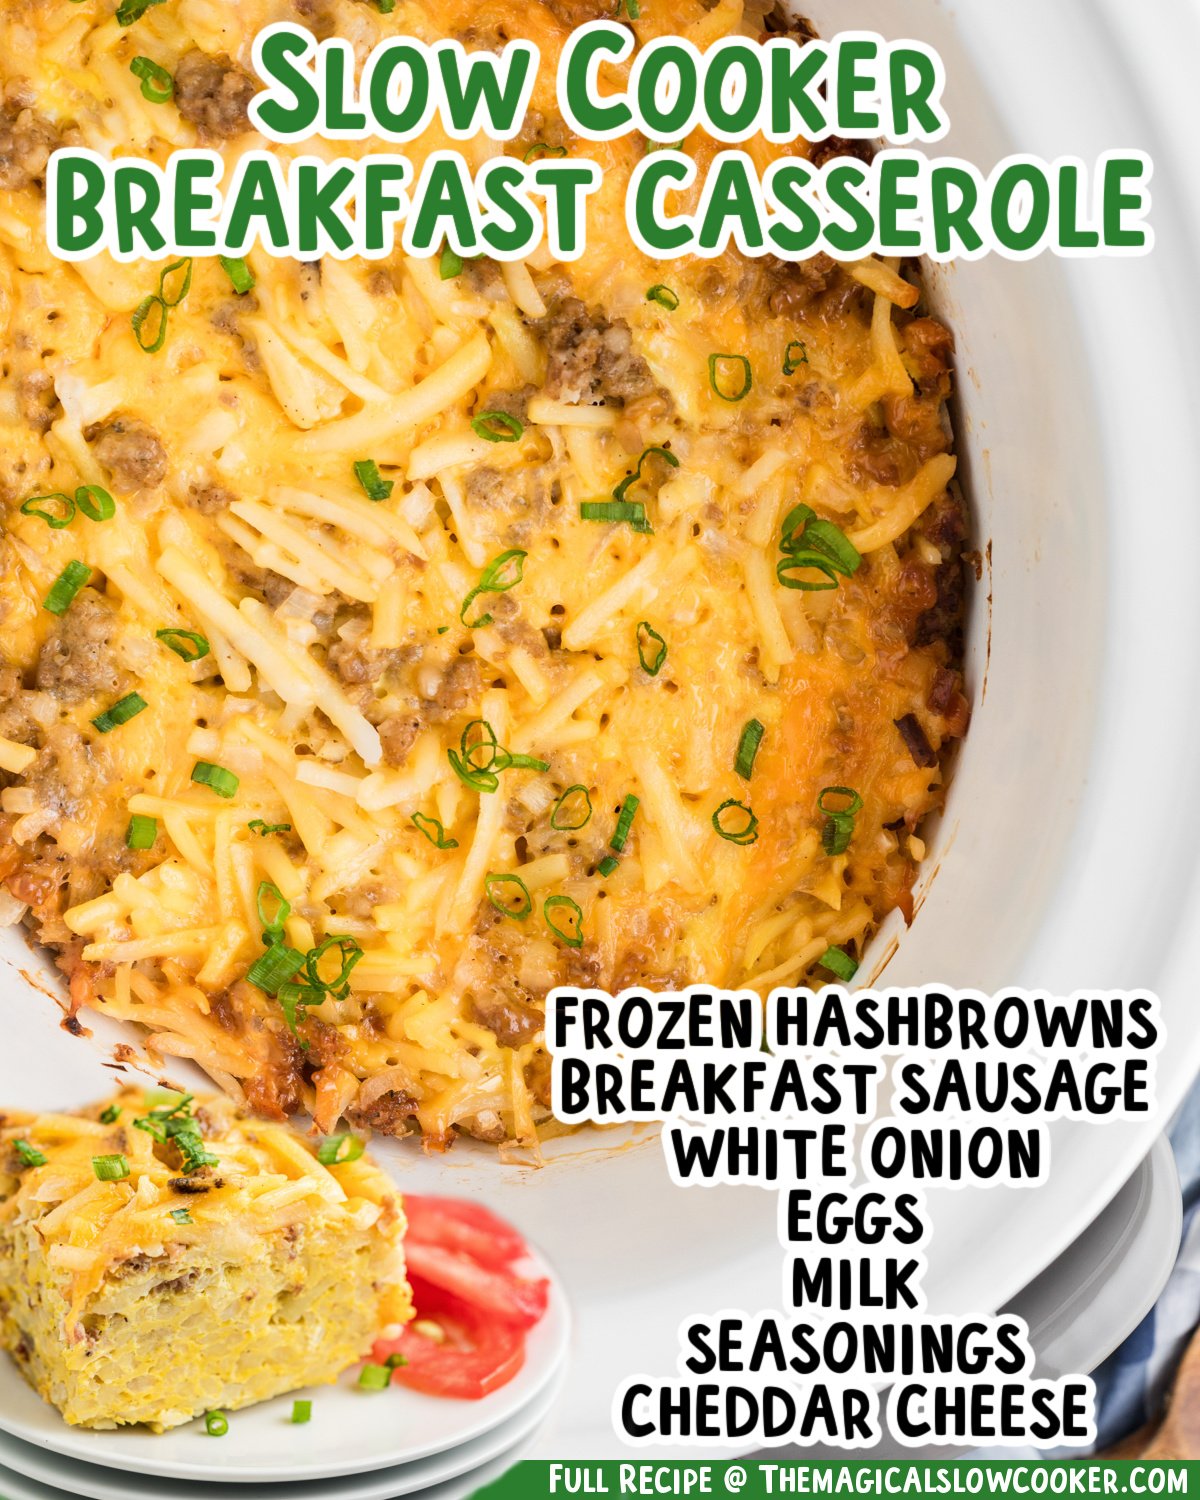 two images of slow cooker breakfast casserole with text list of ingredients.